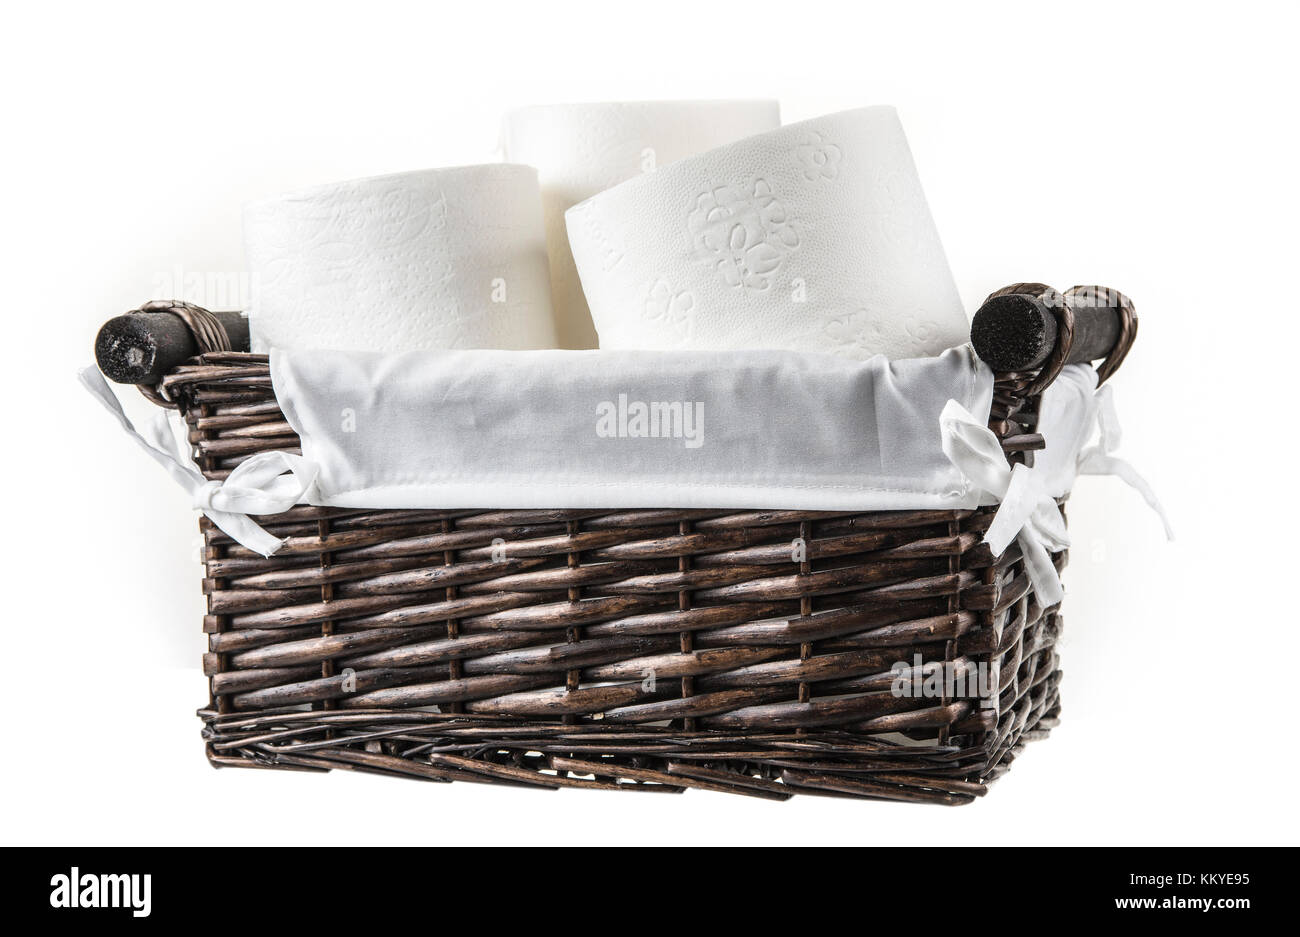 Basket full of toilet paper on the white background Stock Photo